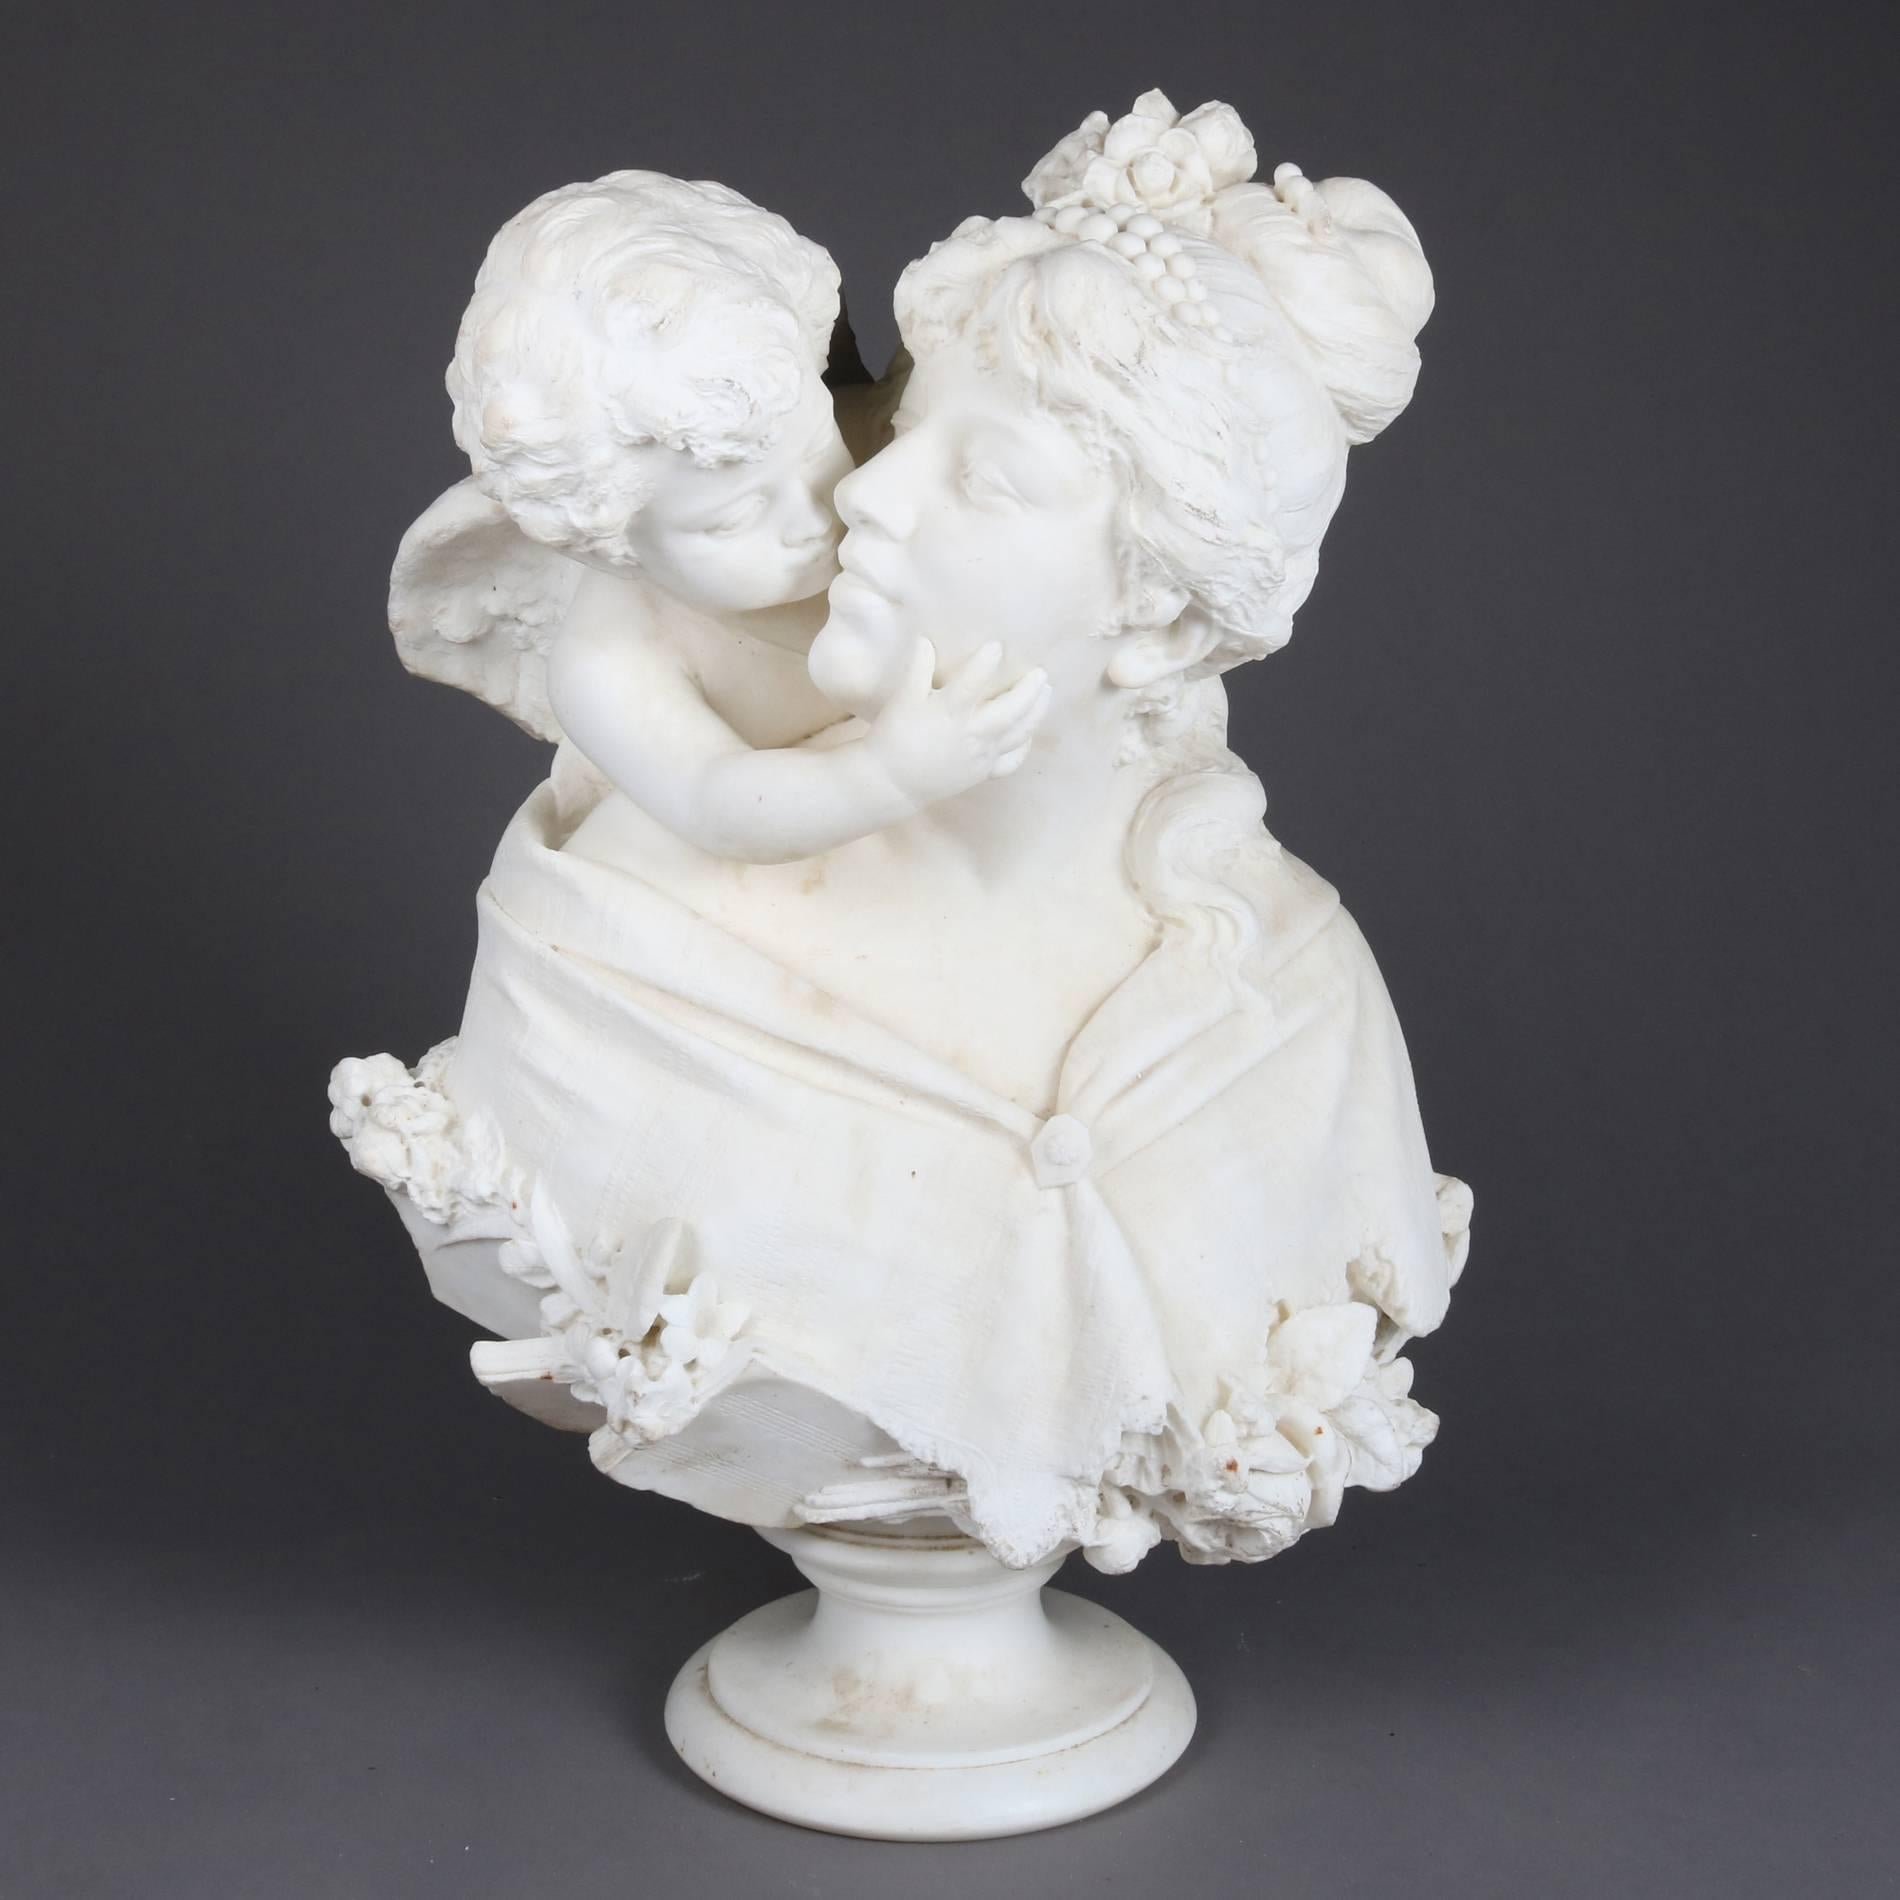 Oversized antique carved alabaster bust depicts Psyche and Amor, also known as Psyche Receiving Cupid's First Kiss (1798), by François Gérard, or Venus, Cupid, Folly, and Time (also called An Allegory of Venus and Cupid and A Triumph of Venus), an